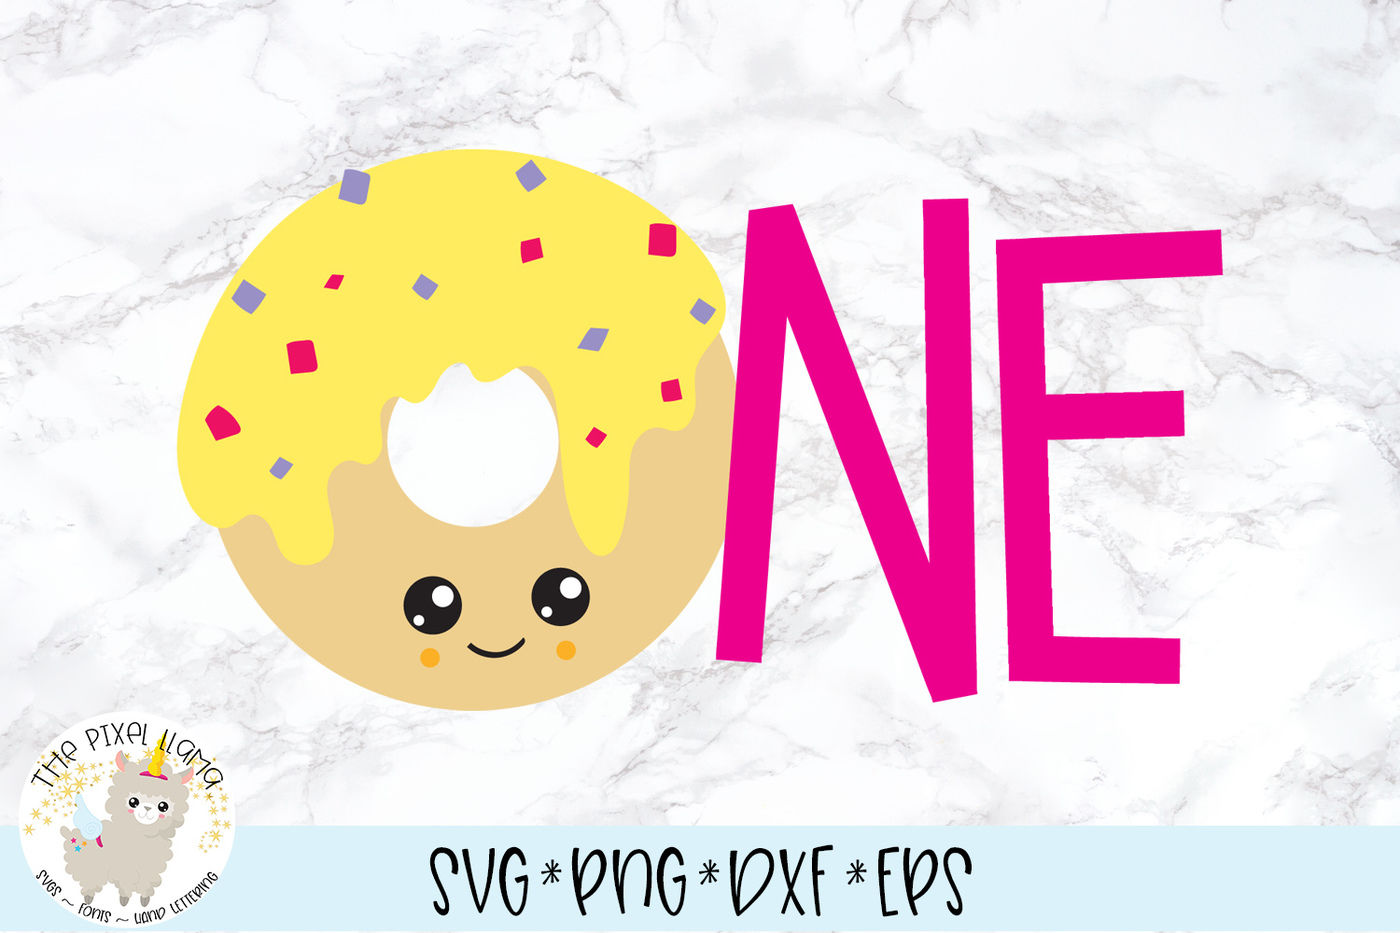 Instant Download Two Donut Birthday SVG Files Download 2nd Birthday Donut Bodysuit SVG Silhouette Cut Files Cricut Cut Files Print